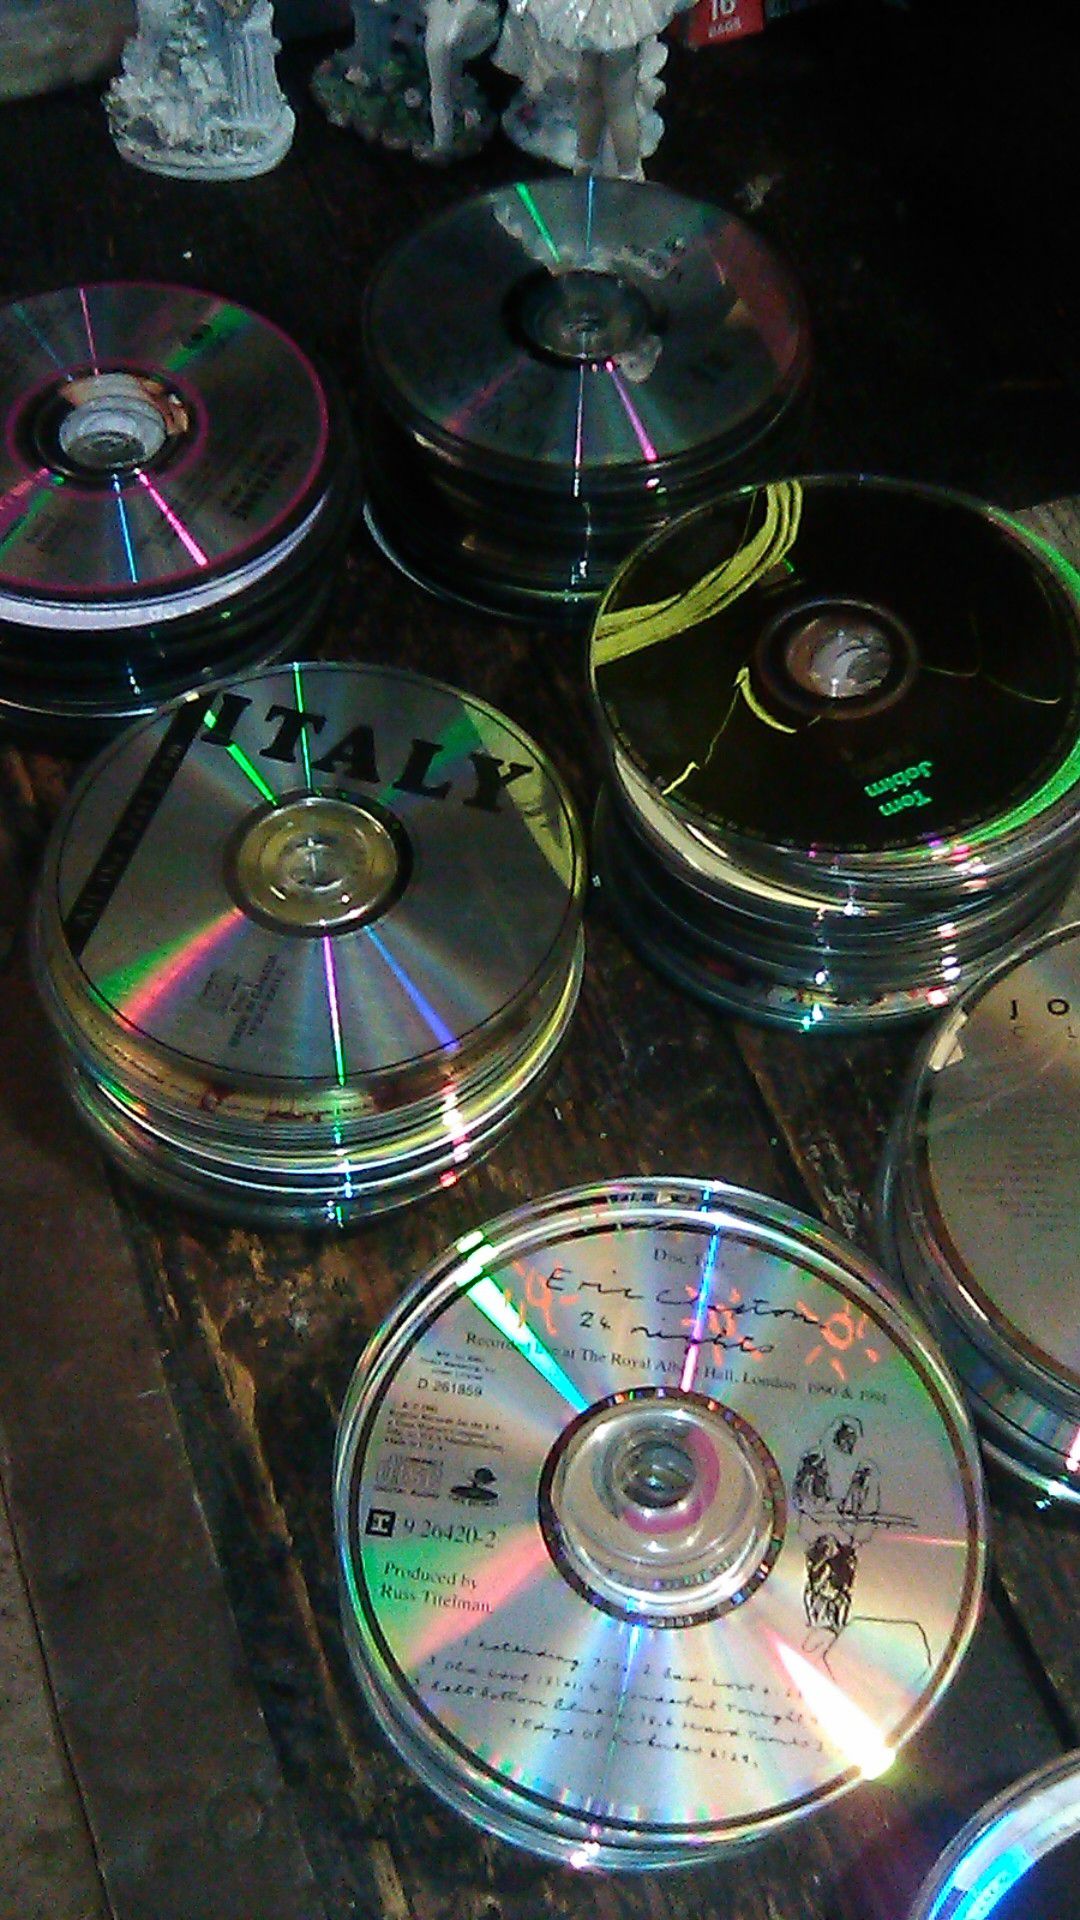 280 CDs. Mostly Spanish but some oldies. $30 obo